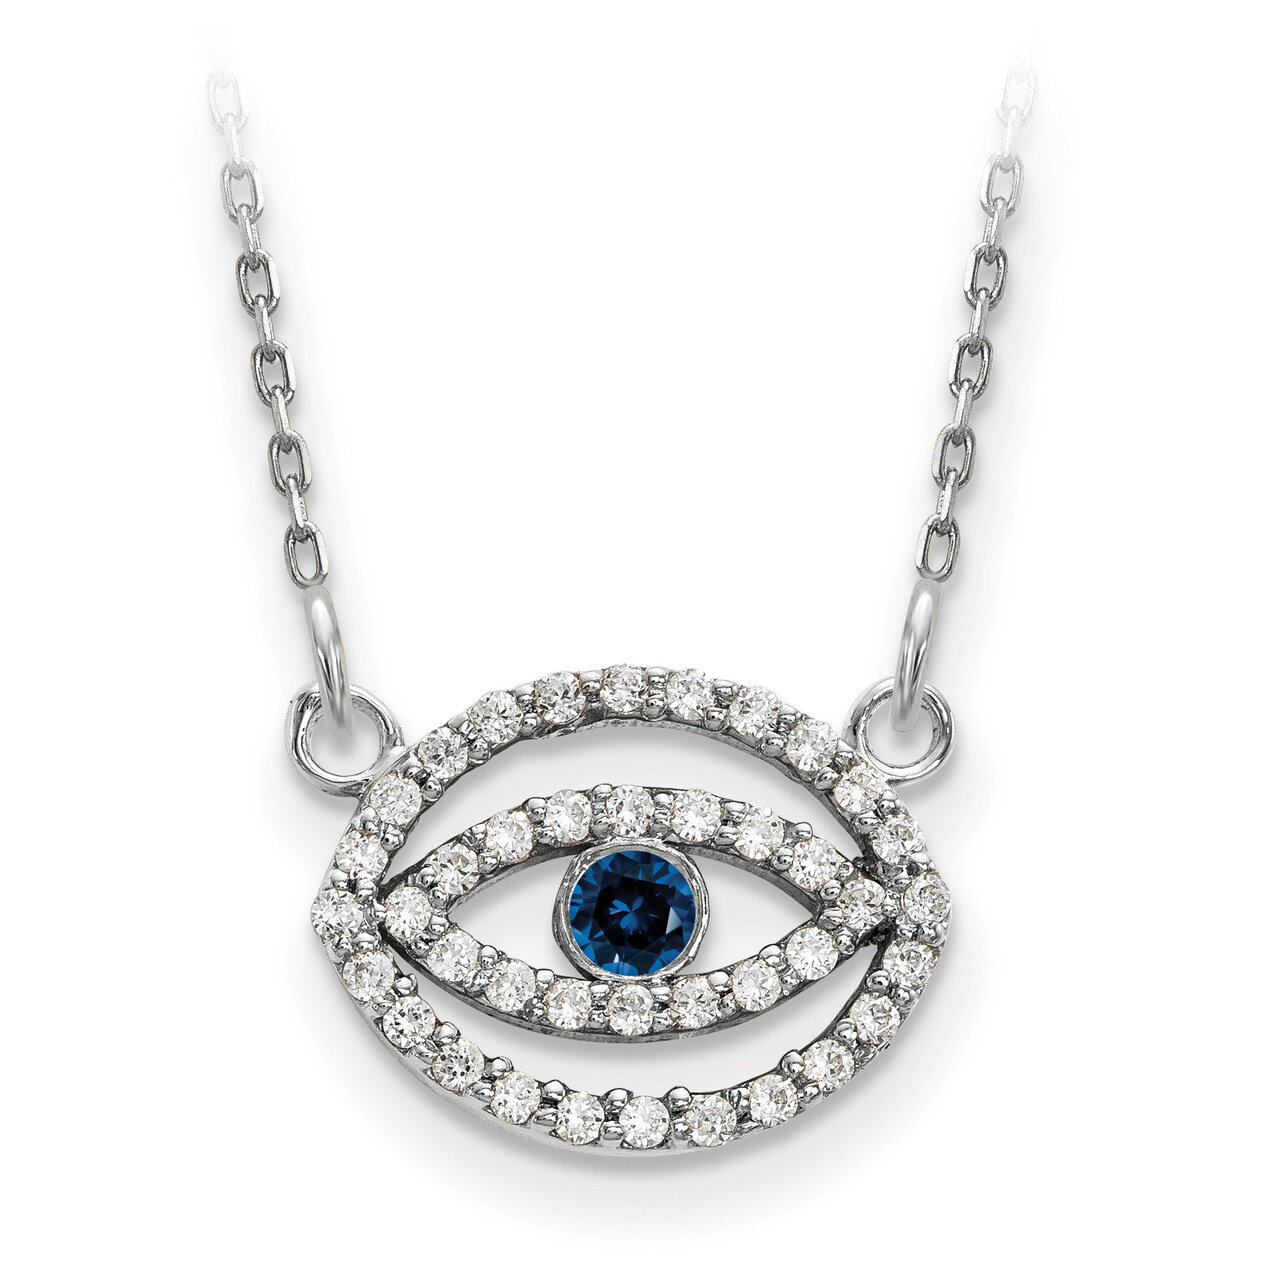 Small Diamond and Sapphire Gold Halo Evil Eye Necklace 14k White Gold XP5036WS/A